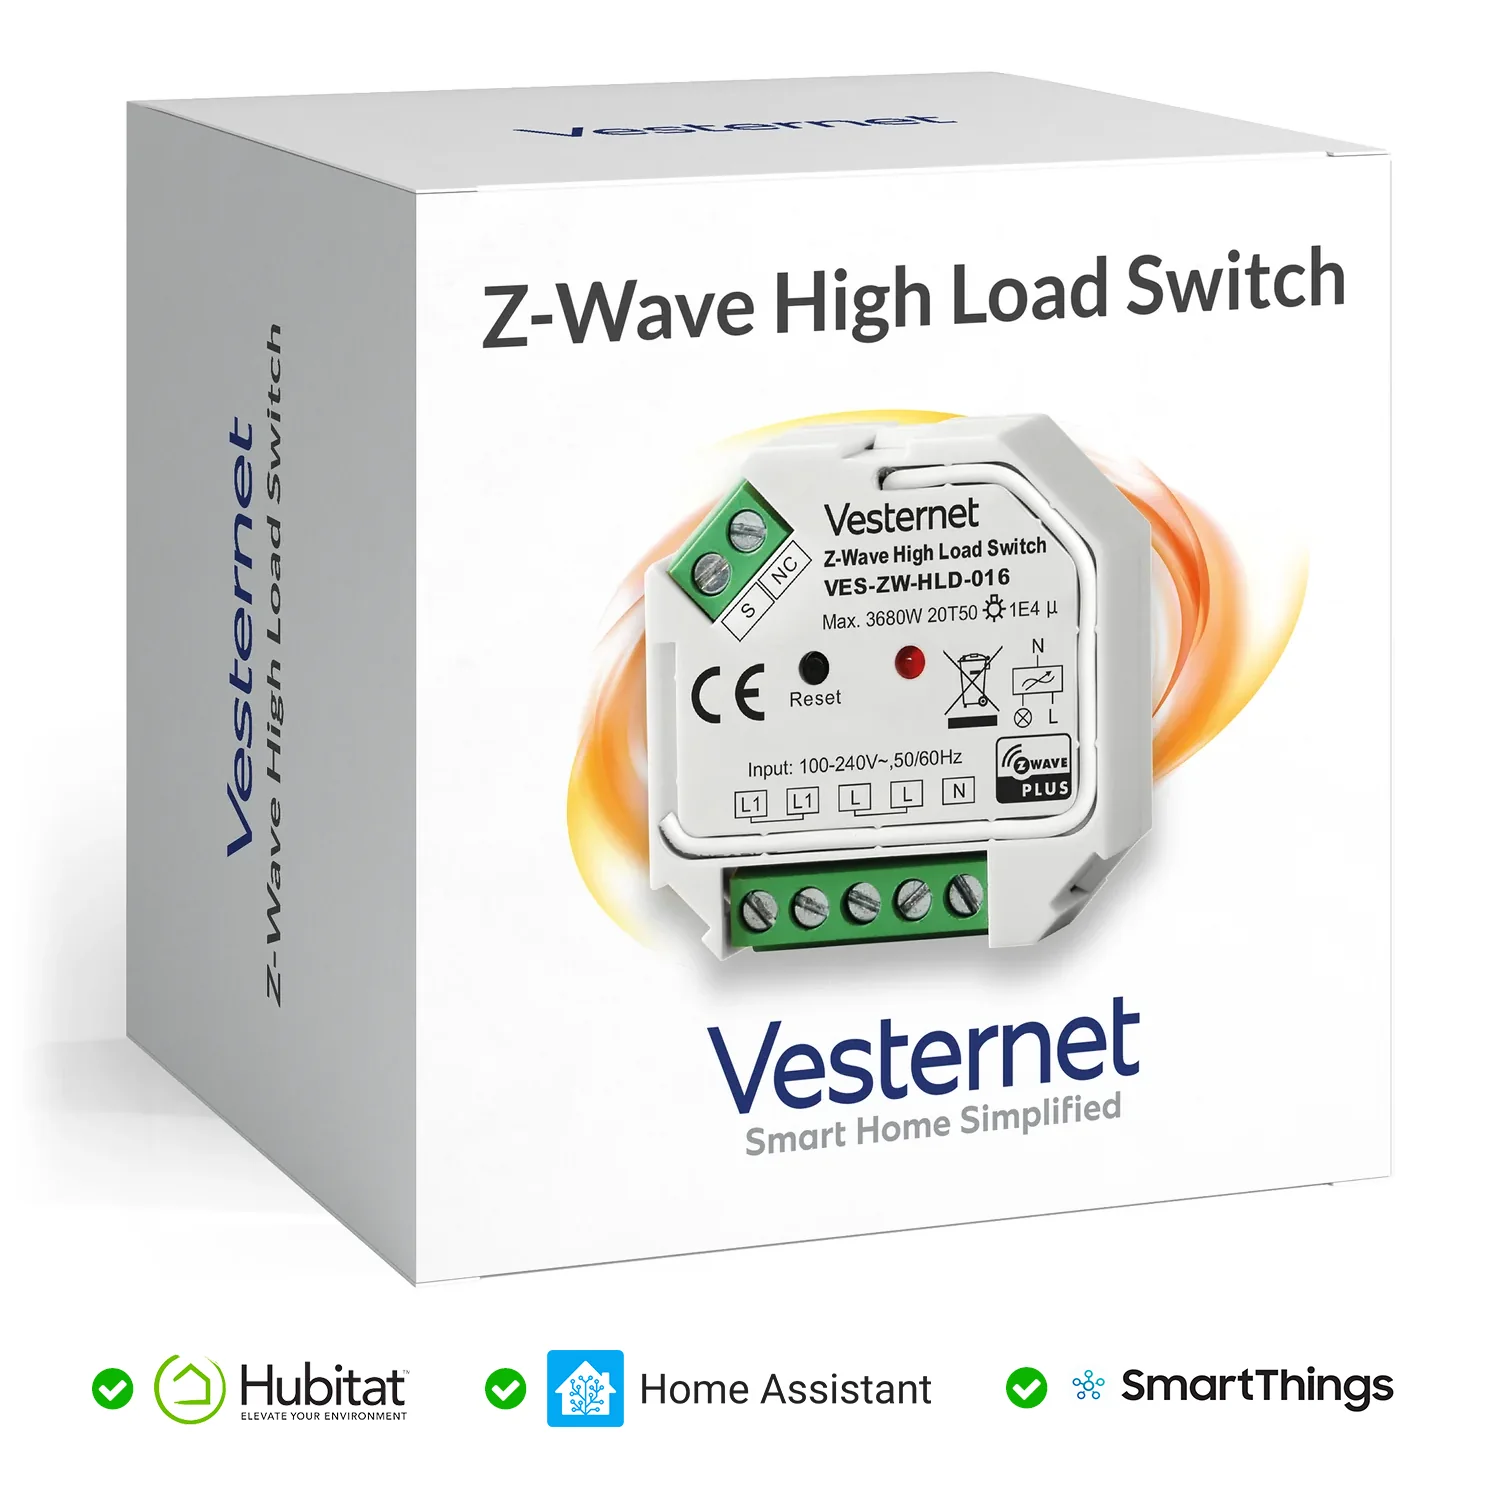 Are firmware updates available for these vesternet devices and if so how are they provided?